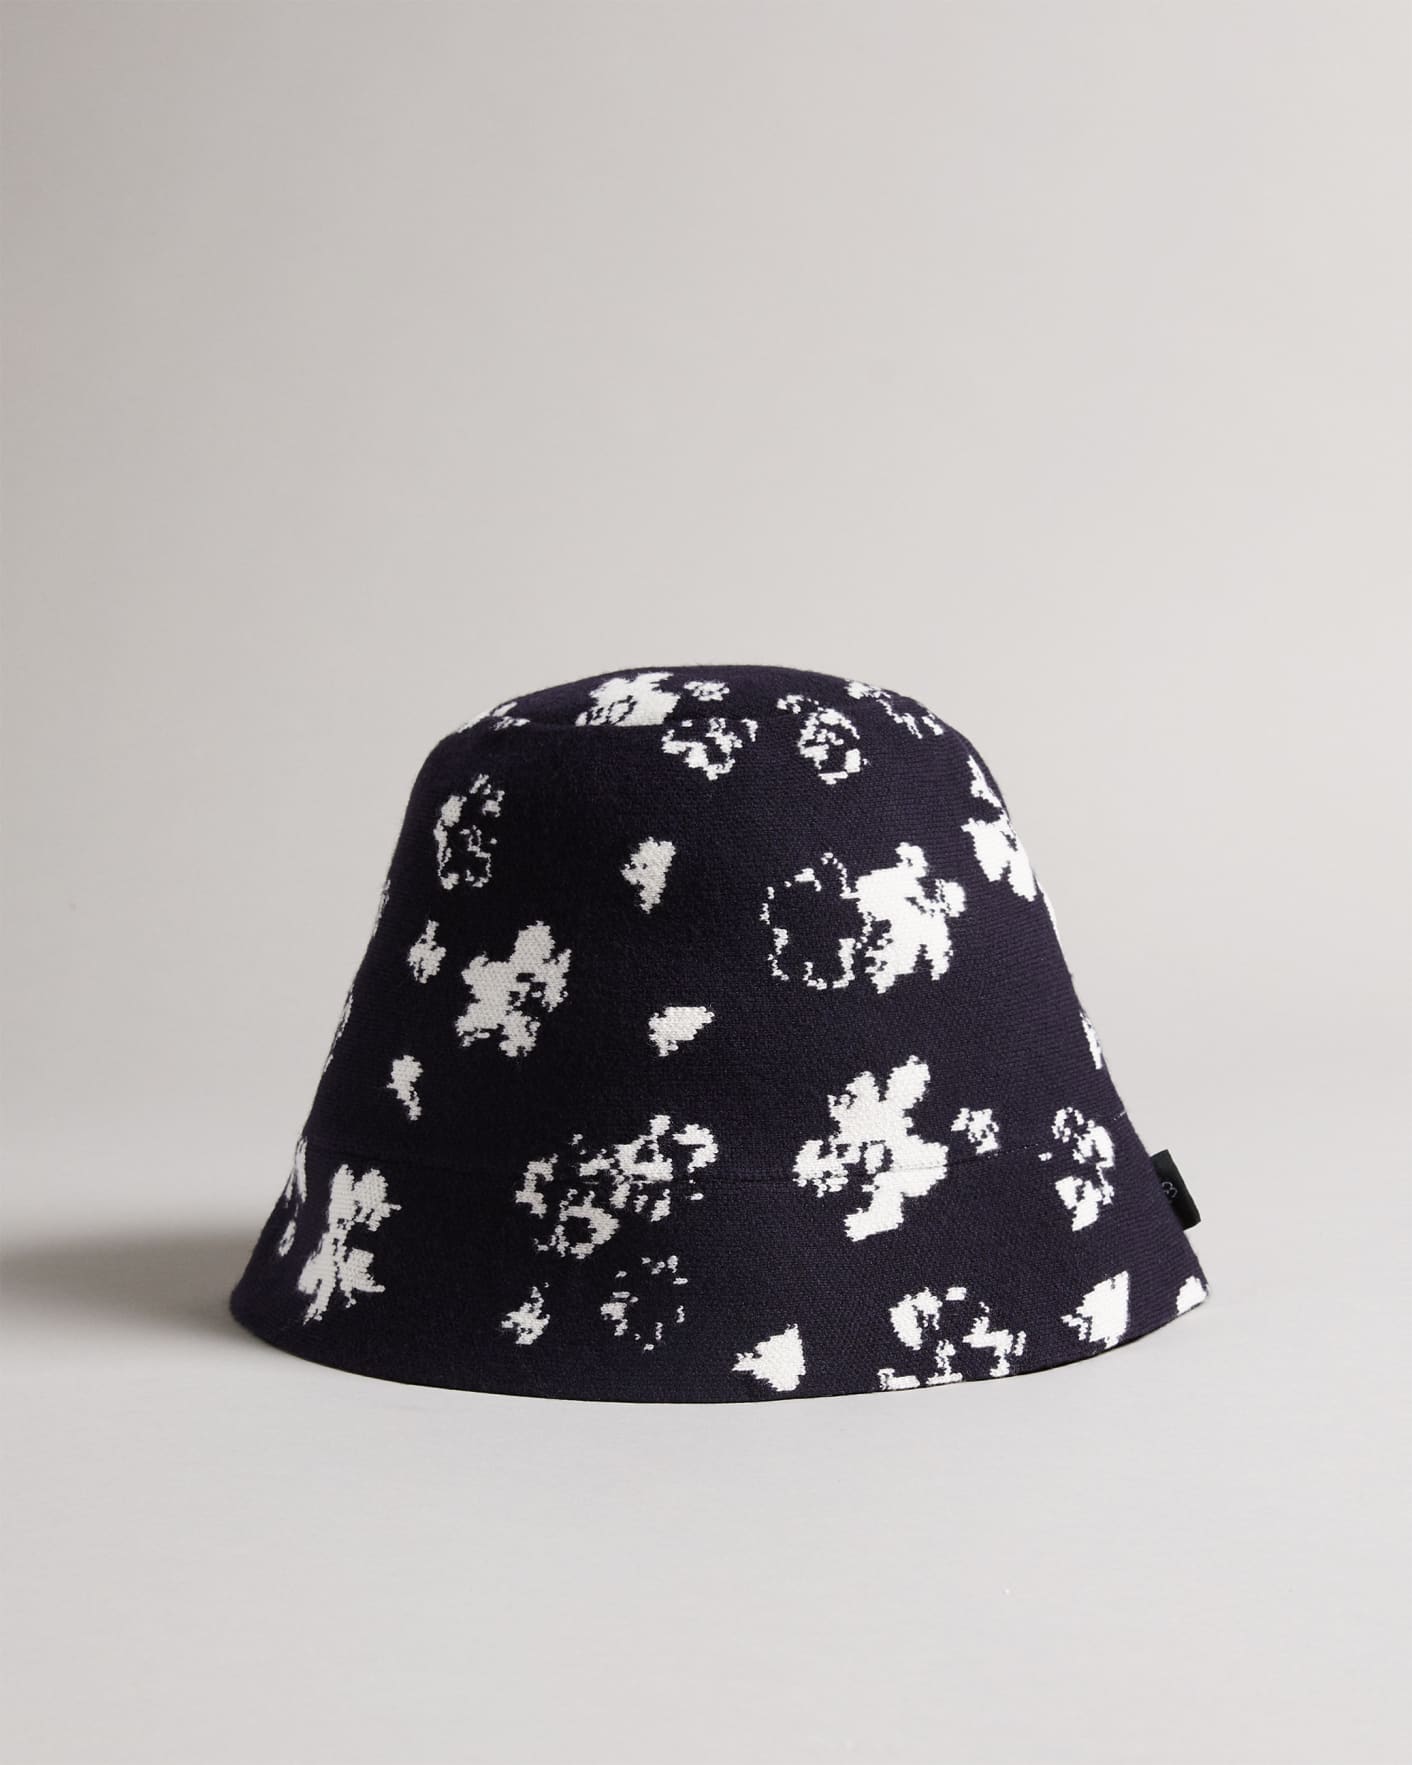 OURNE - DK-NAVY | Hats & Caps | Ted Baker US